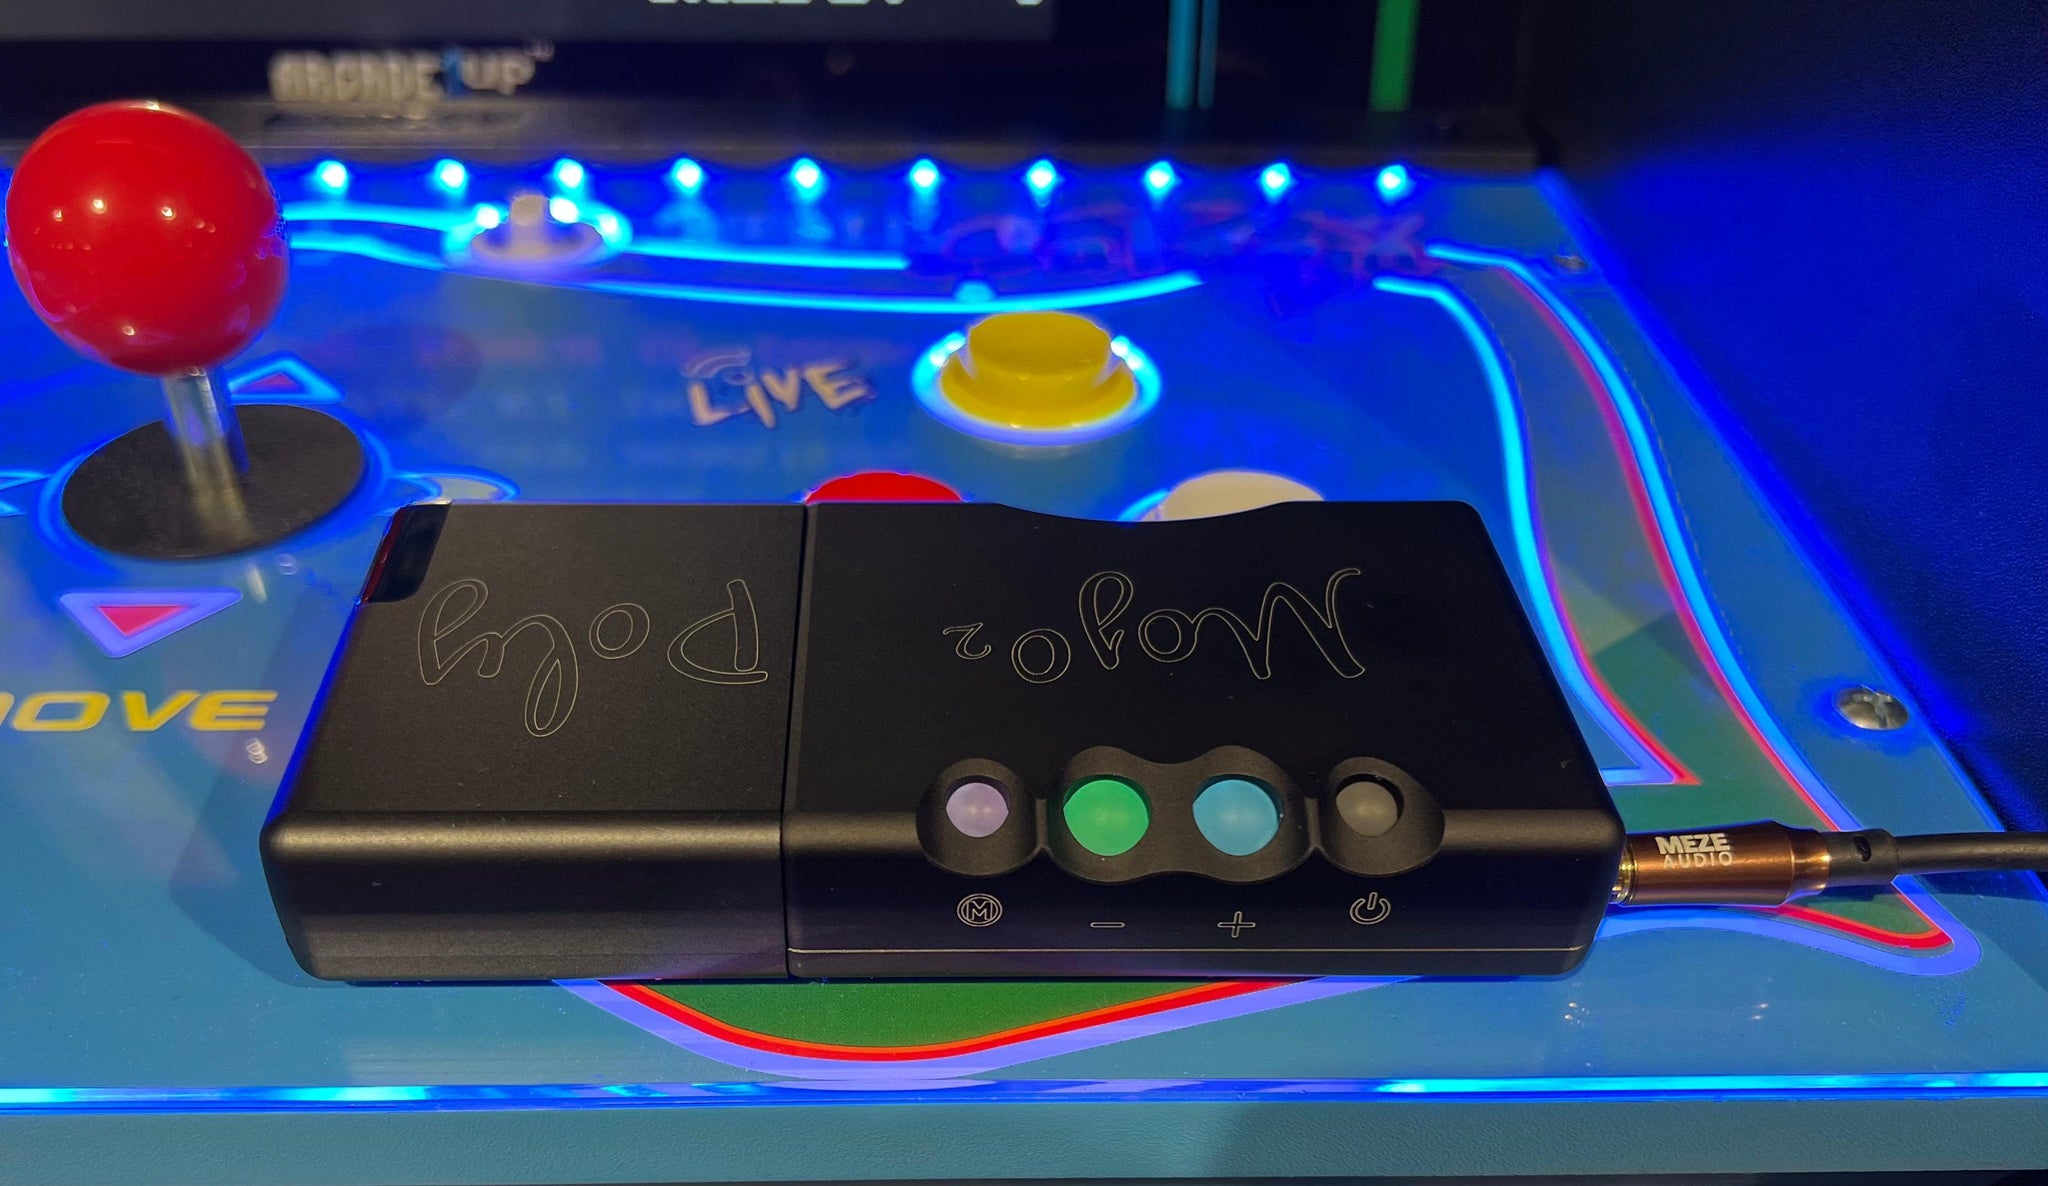 Chord Mojo 2 with attached Chord Poly streamer next to arcade cabinet controller